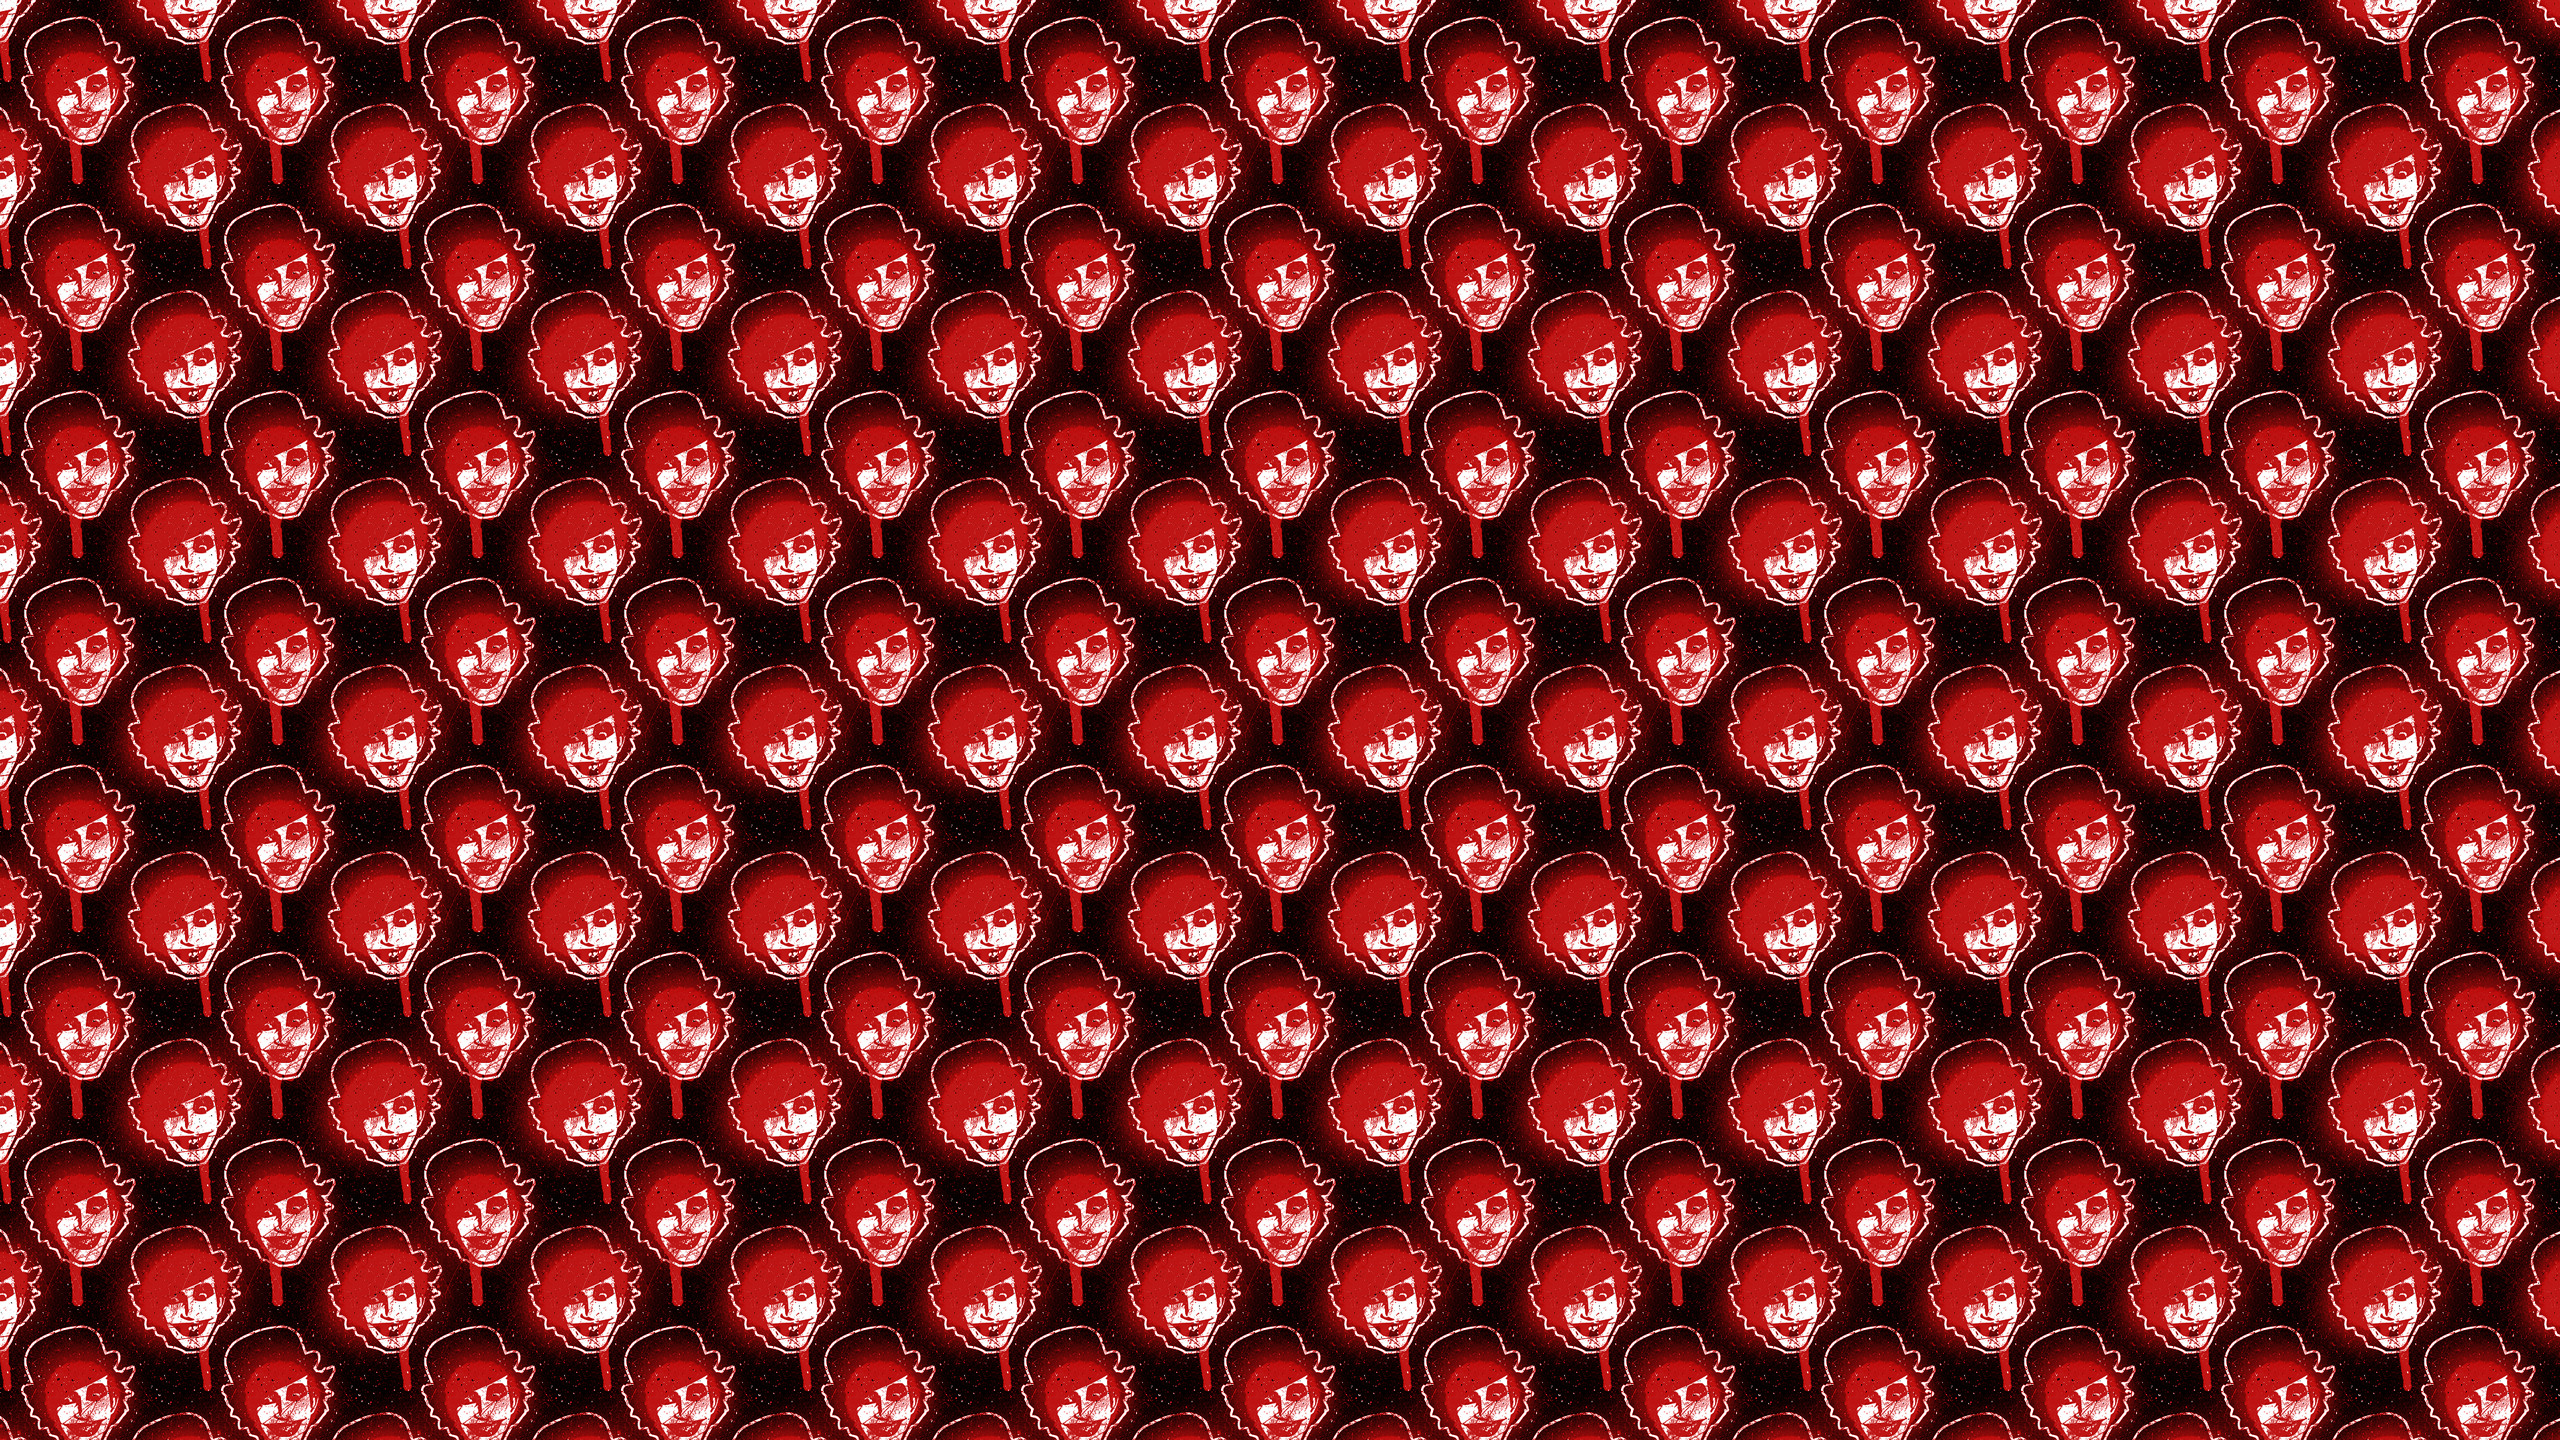 2560x1440 this Scary Clown Desktop Wallpaper is easy. Just save the wallpaper .